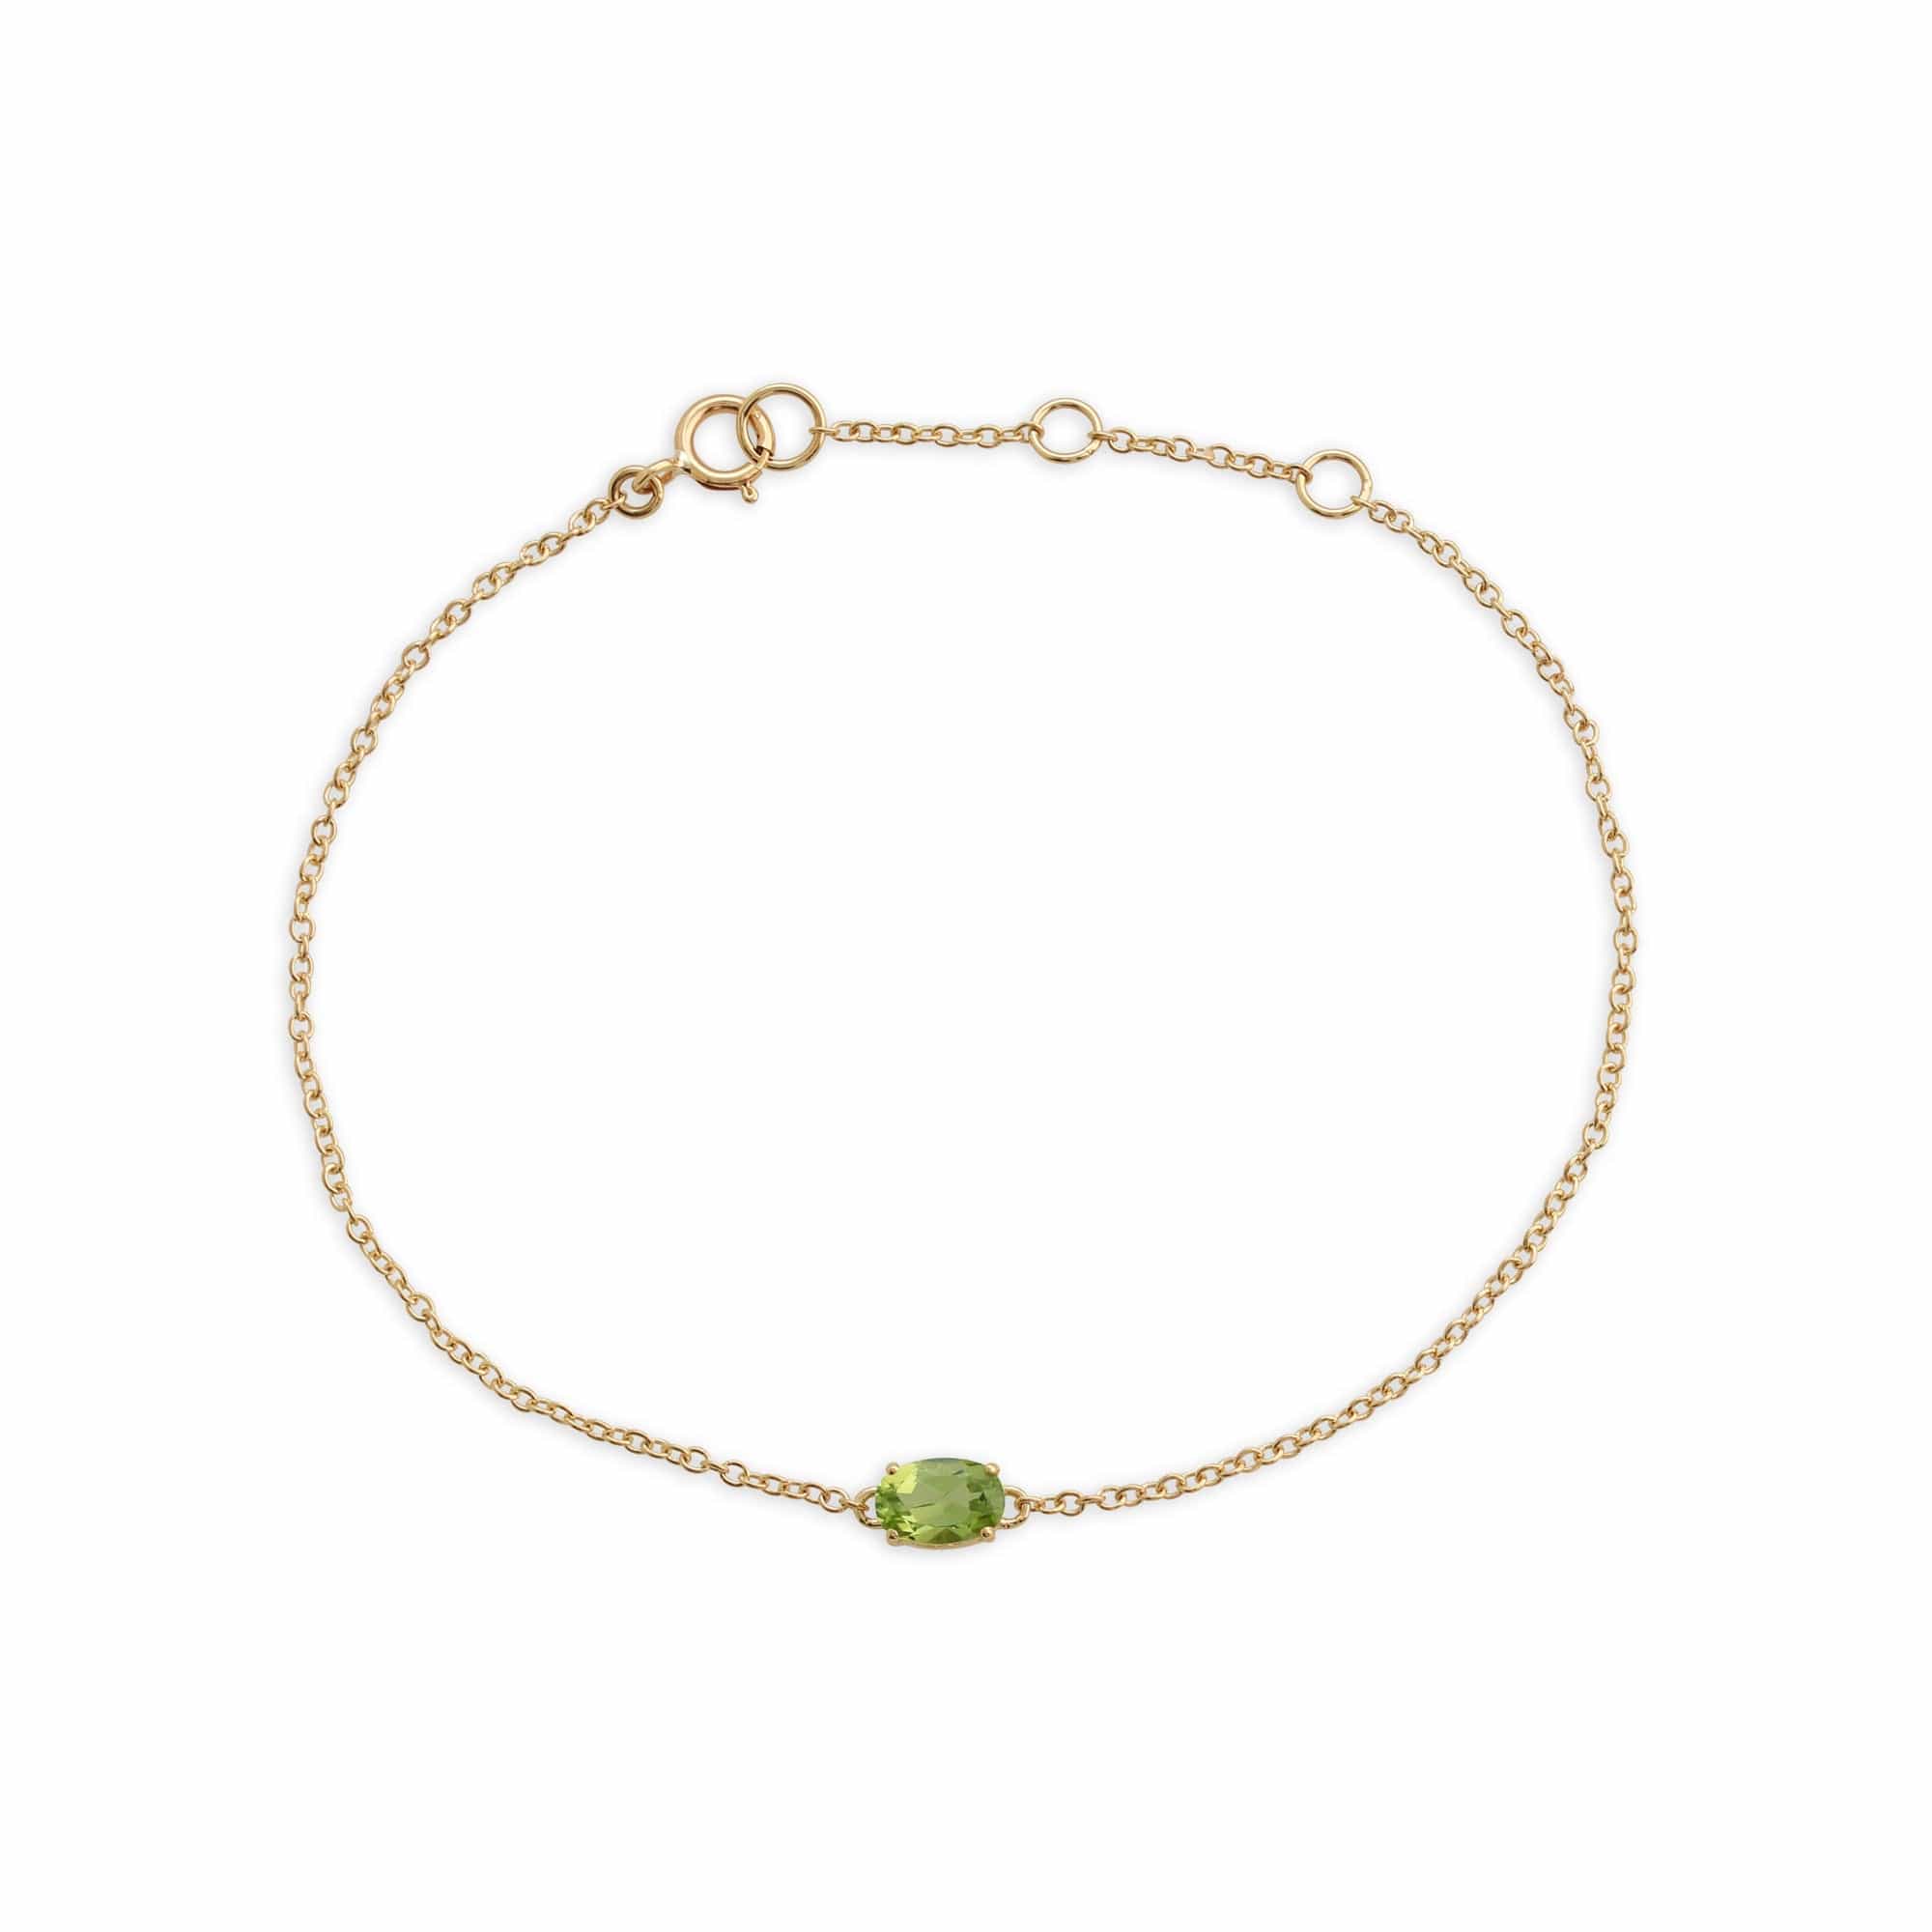 Image of Classic Oval Peridot Single Stone Bracelet in 9ct Yellow Gold